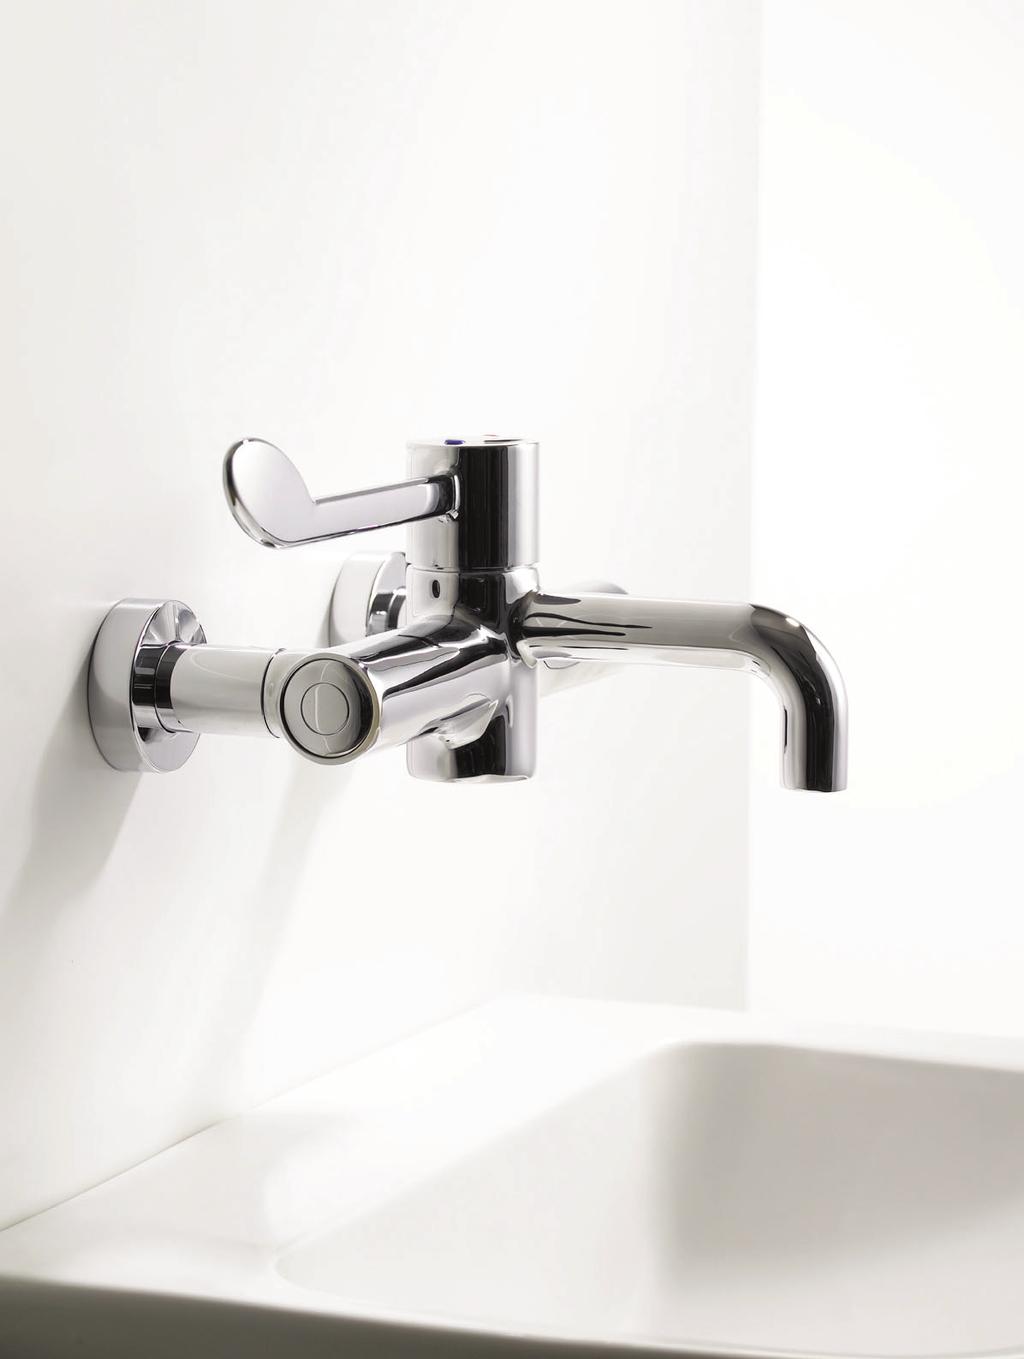 hospital brassware infection control has recently become a renewed healthcare priority and the new markwik range of fittings was developed with this in mind.